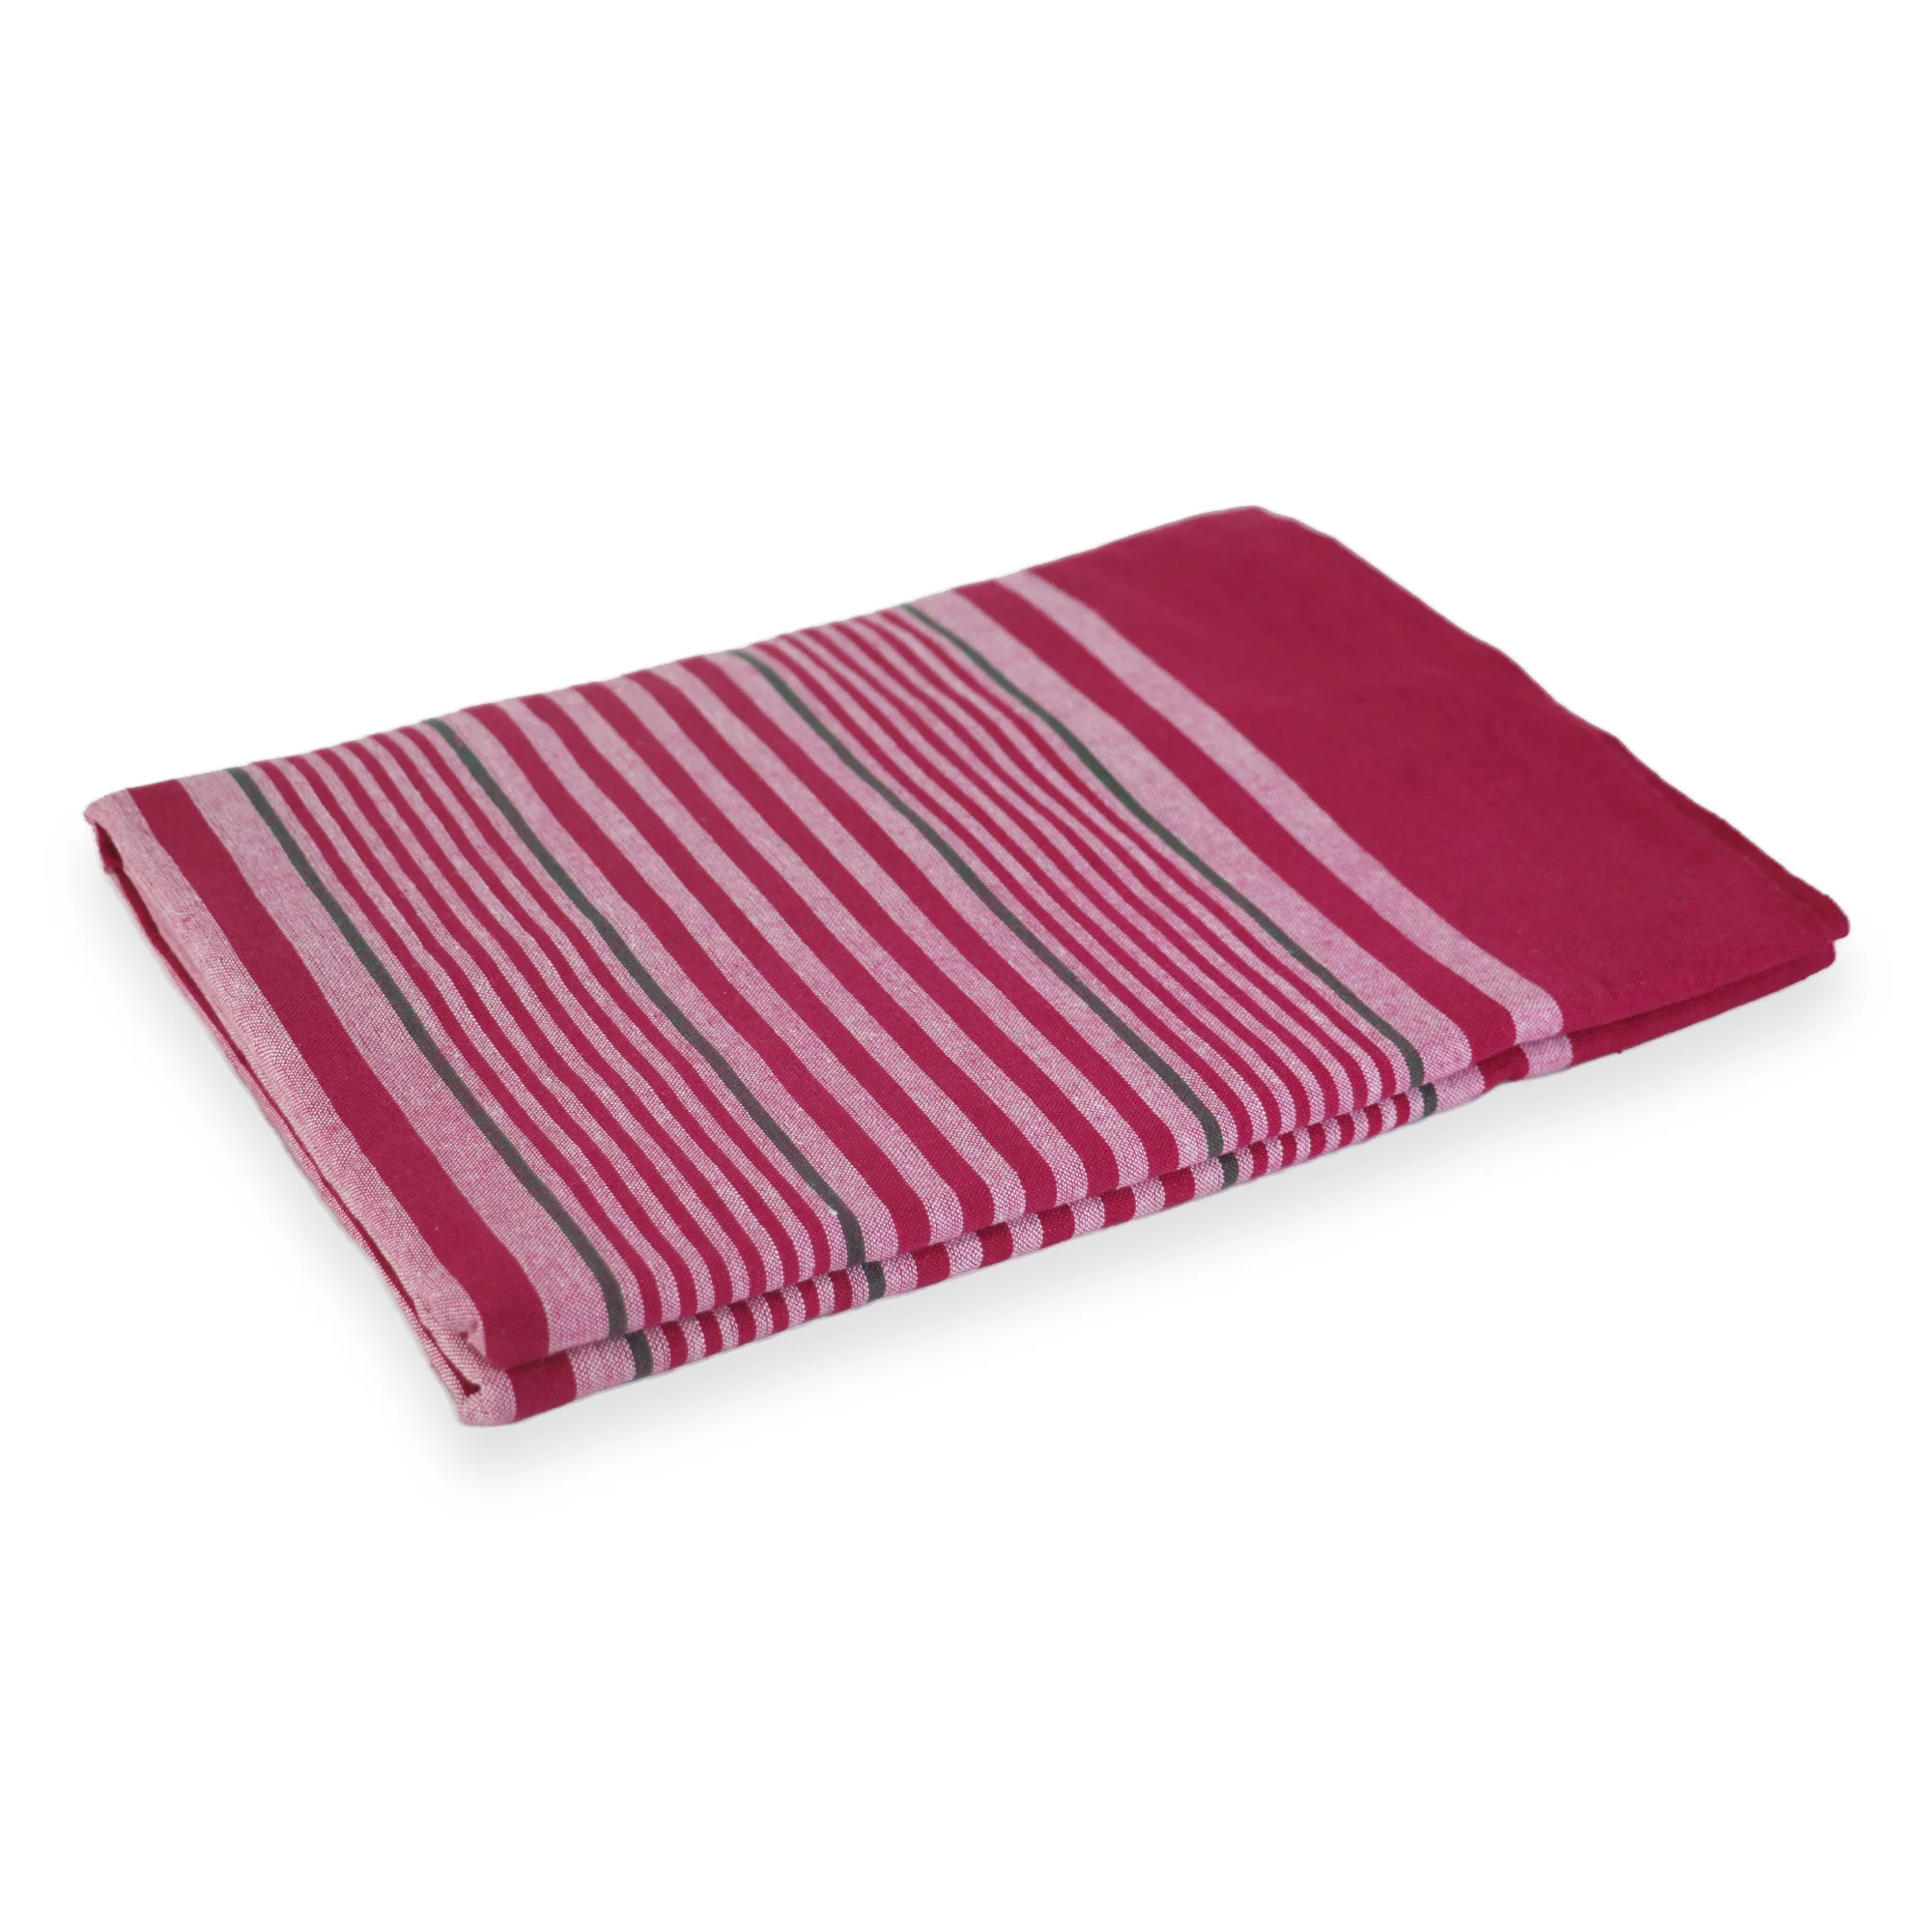 Dark Pink Handloom Cotton Bed Sheets 54x80 (Inches) Light Color for Double, Single Beds